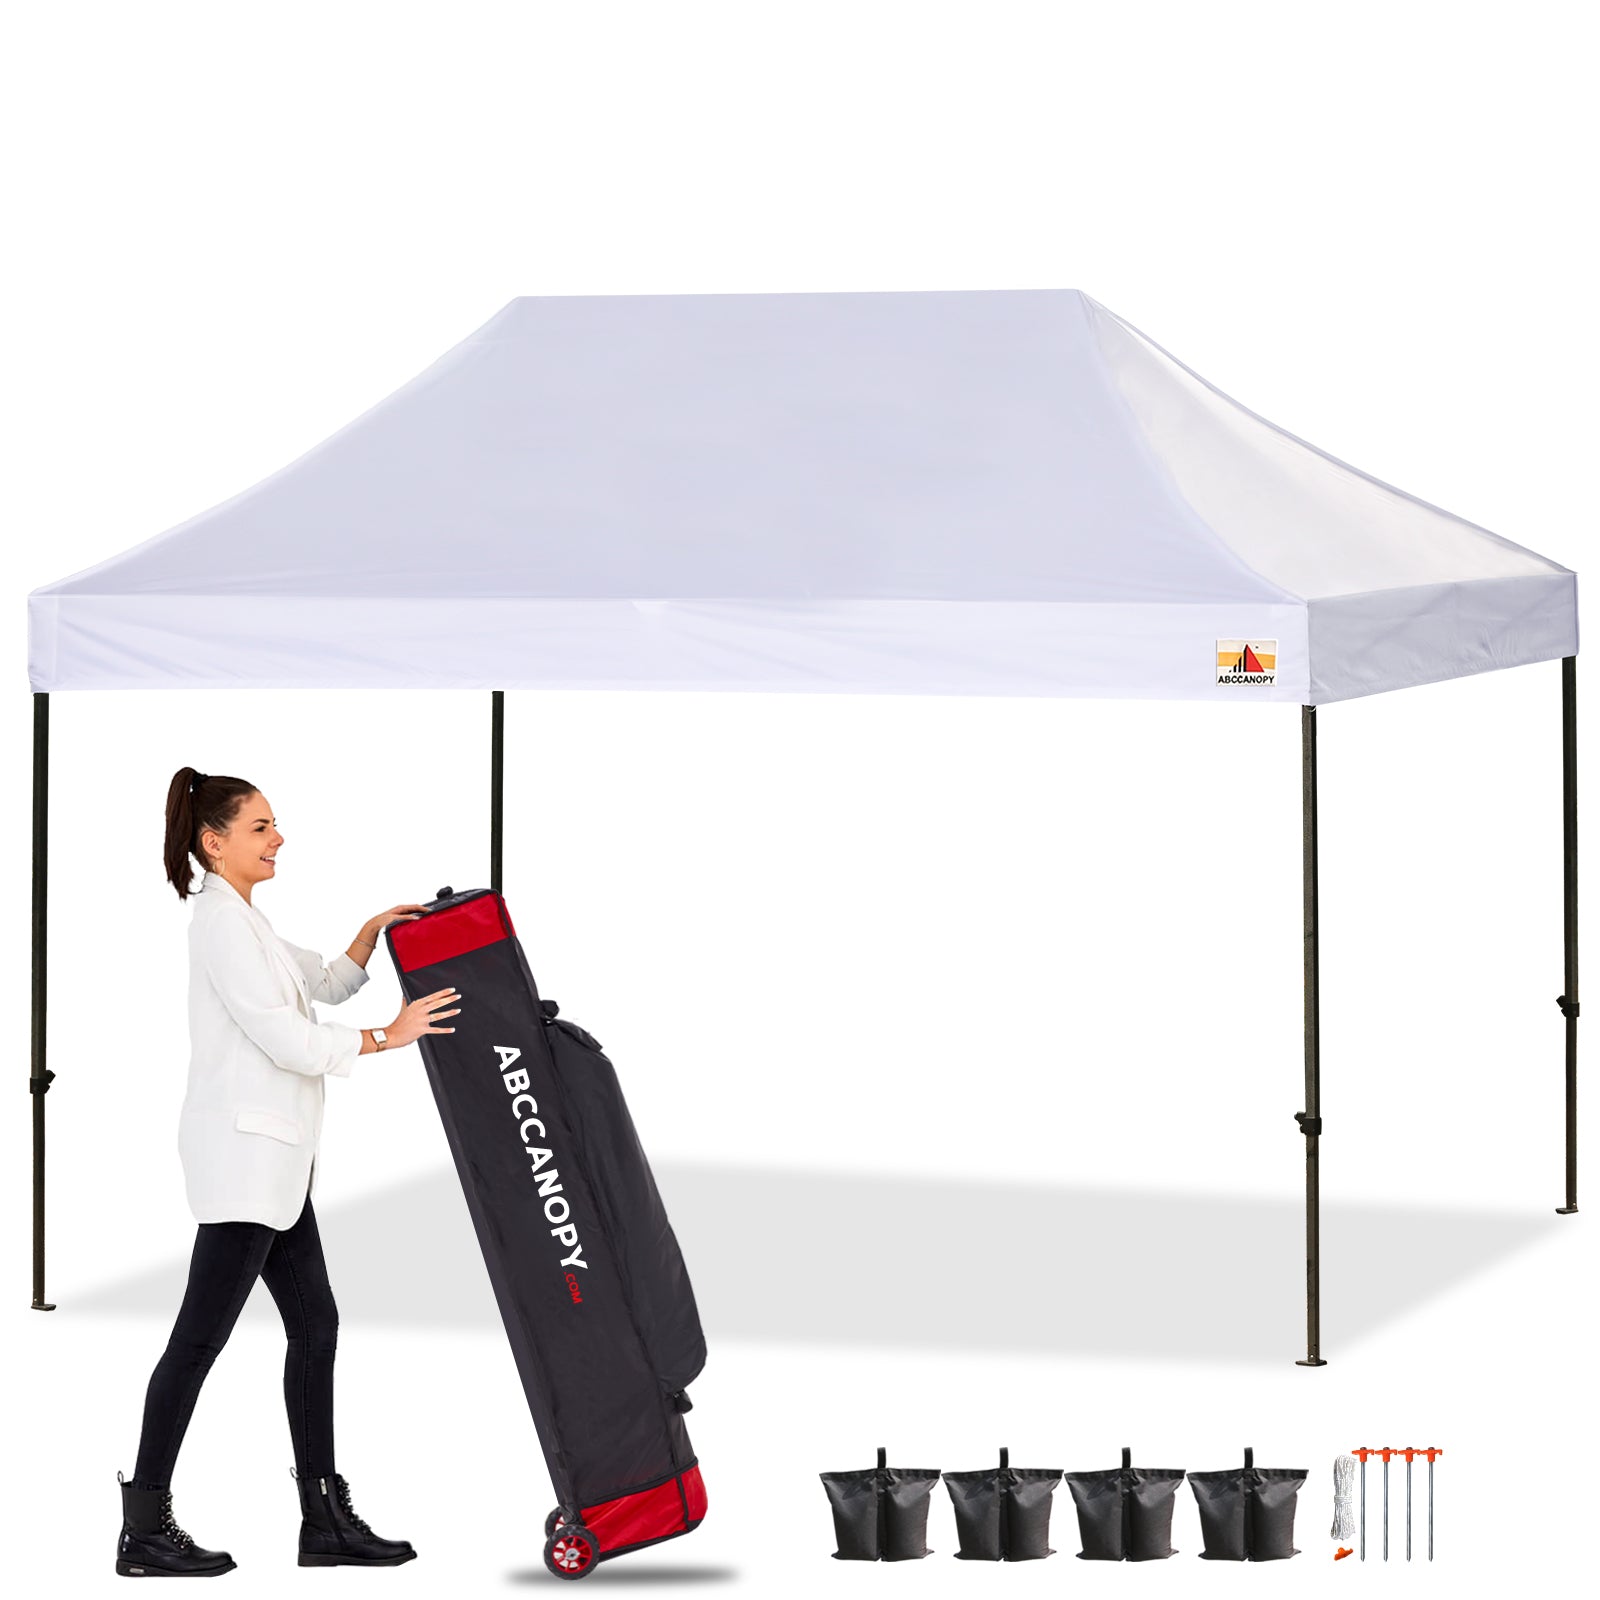 S1 Commercial Durable Easy Pop Up Canopy 10x15 Instant Shelter